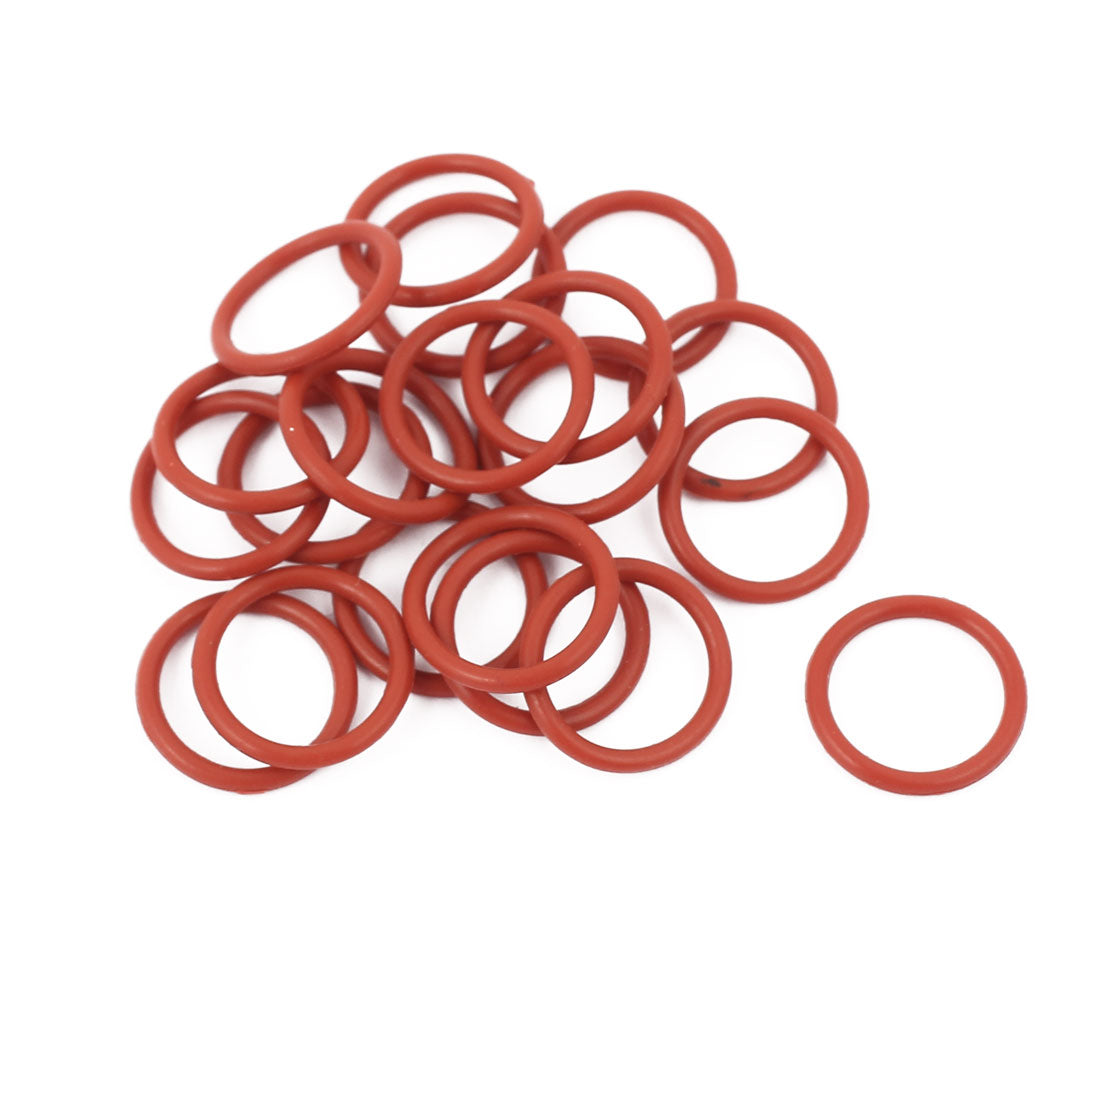 uxcell Uxcell 20pcs 1.5mm Thick Heat Oil Resistant Mini O-Ring Rubber Sealing Ring 14mm OD Red